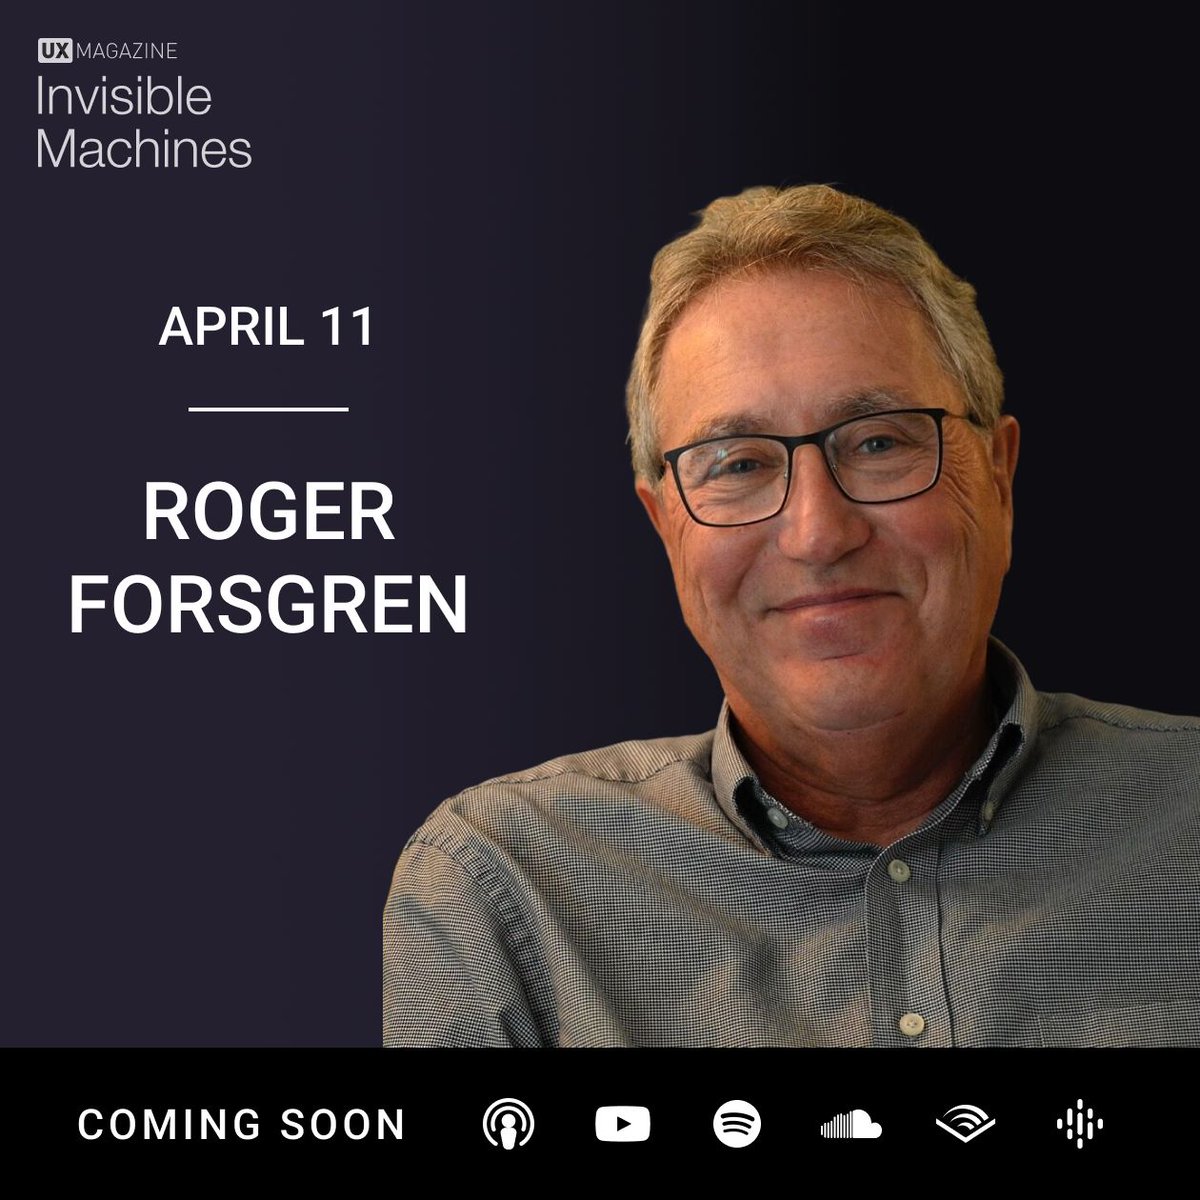 🚀 Stay tuned for our upcoming episode of the Invisible Machines podcast featuring Roger Forsgren, former Chief Knowledge Officer at NASA! Join us this Thursday as we delve into building one of the world's strongest knowledge management organizations. buff.ly/41Pzmxx